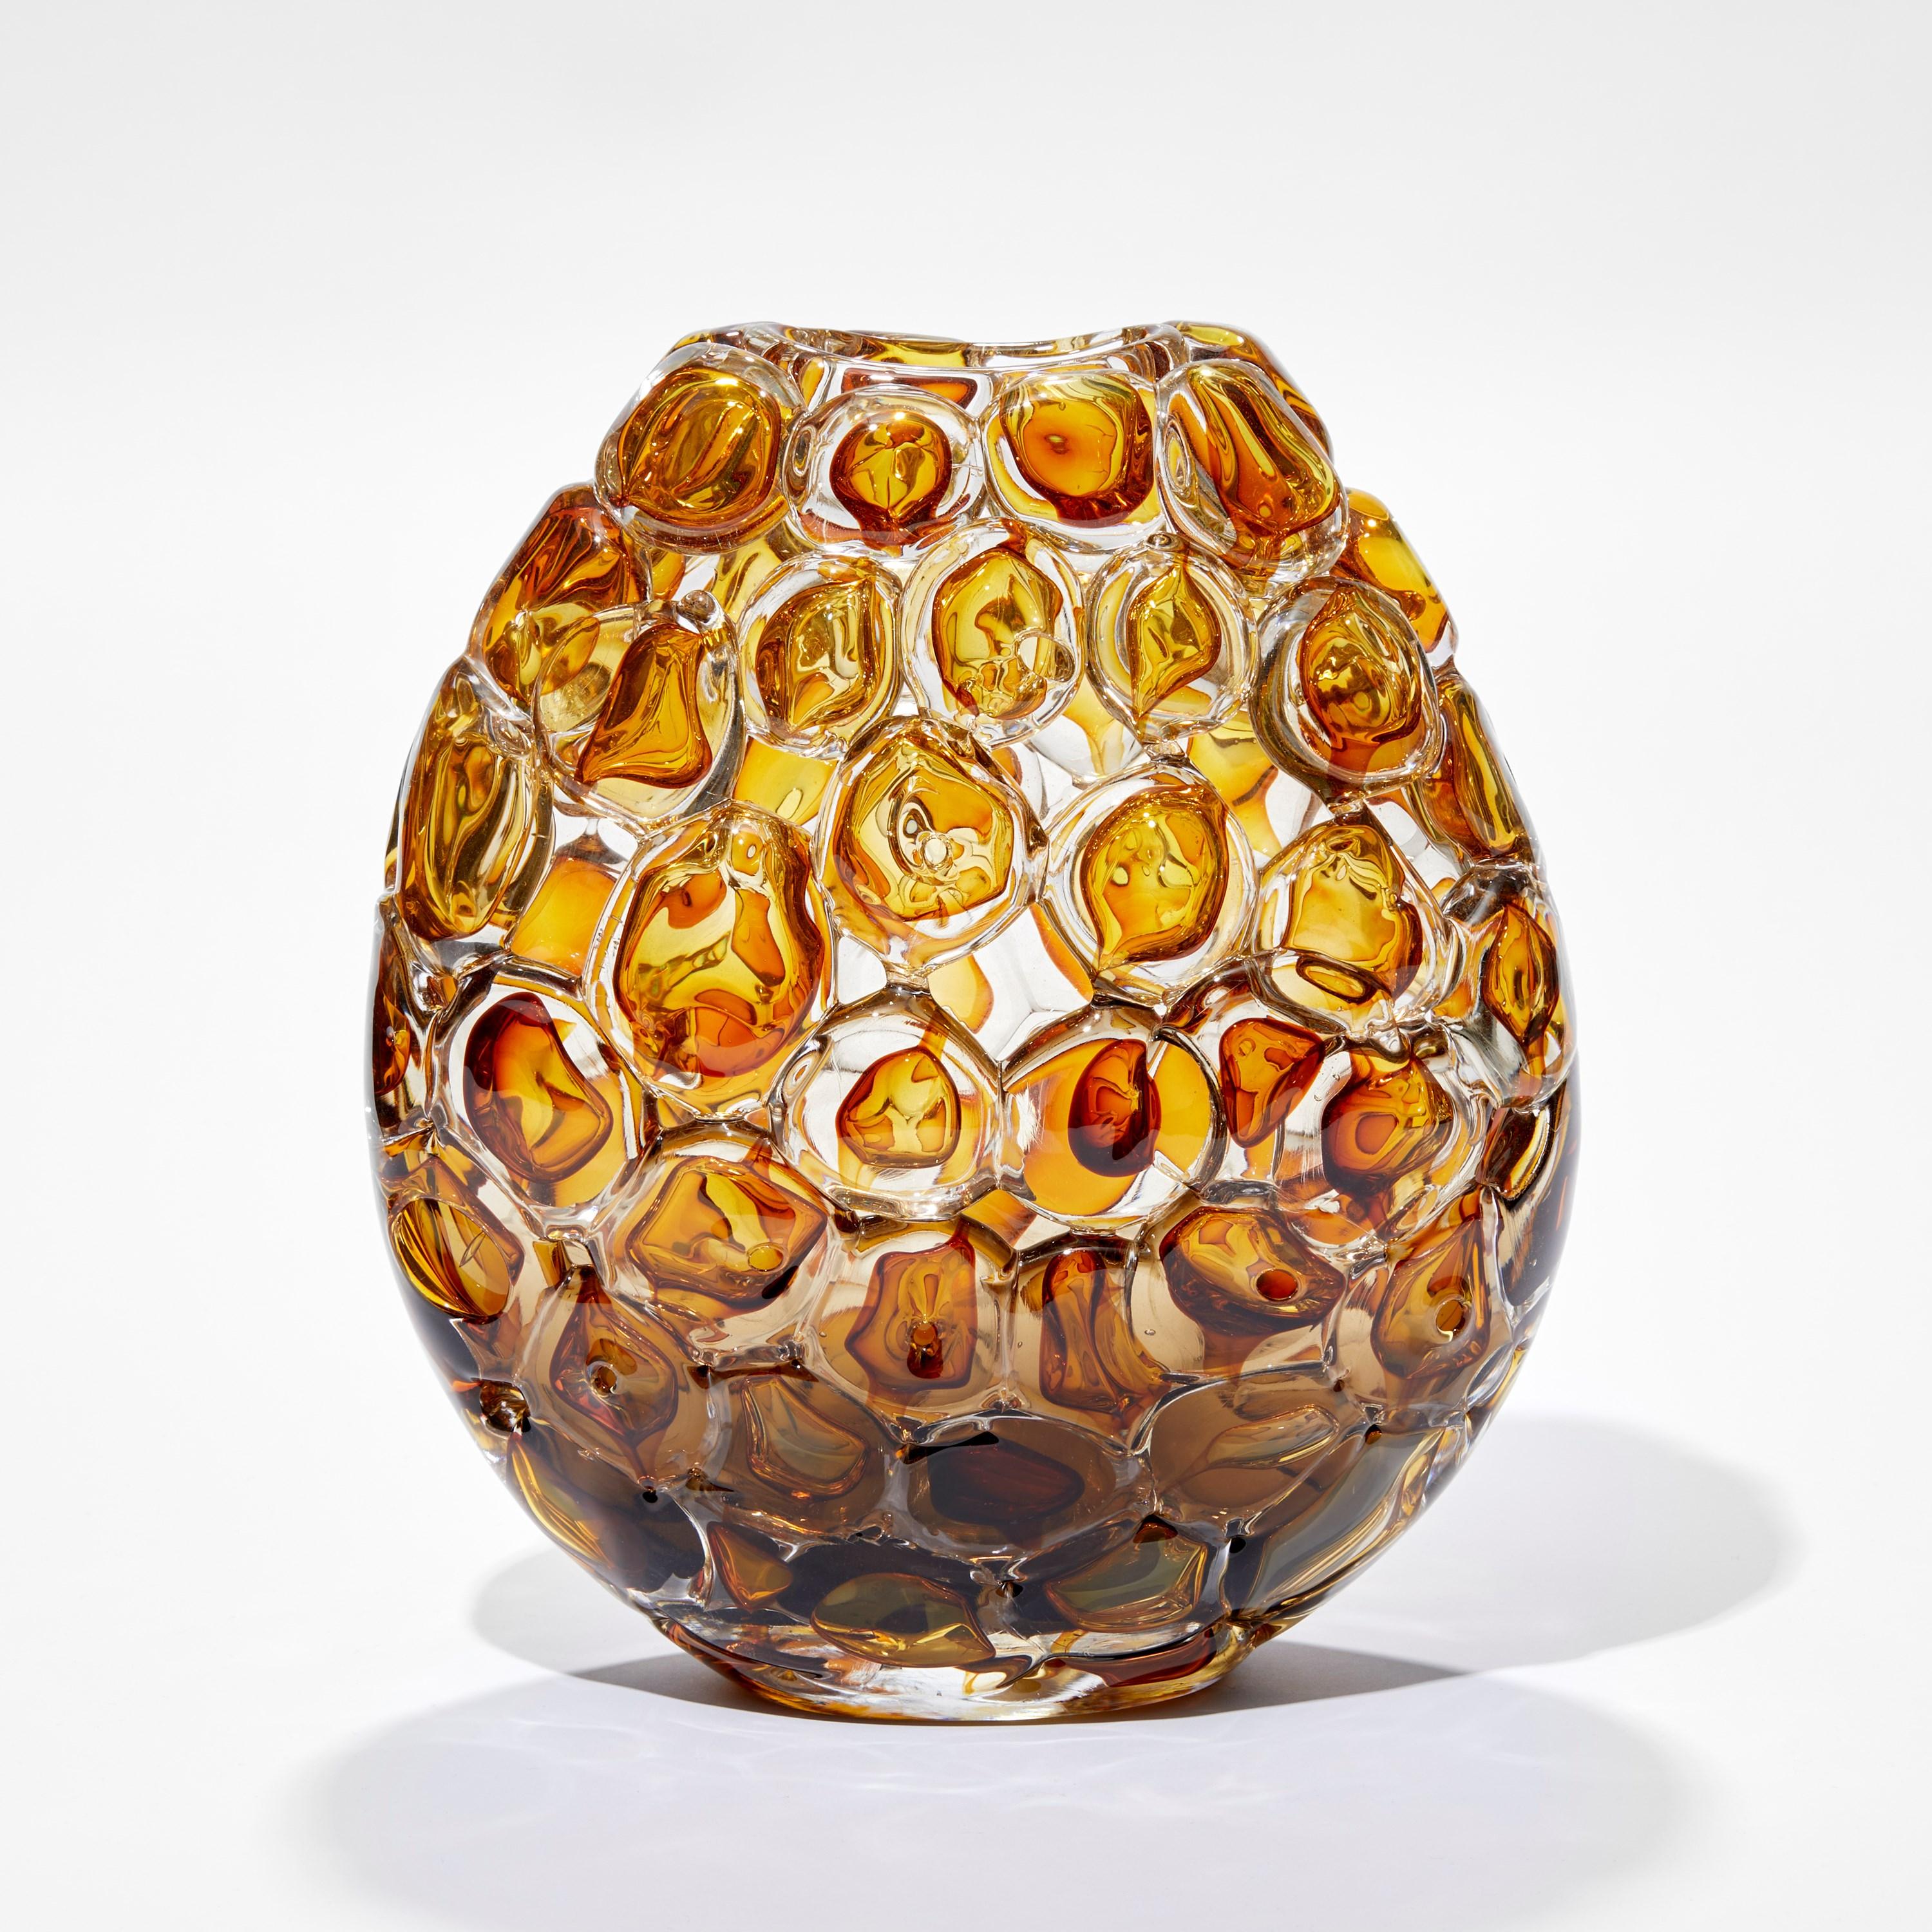 'Bubblewrap in Olivin Ombre & Aurora' is a handblown and sculpted vase created from glass by the British artist, Allister Malcolm.

Playful yet elegant, Malcolm has formed oversized bubbles on the exterior of this handcrafted and blown piece. The